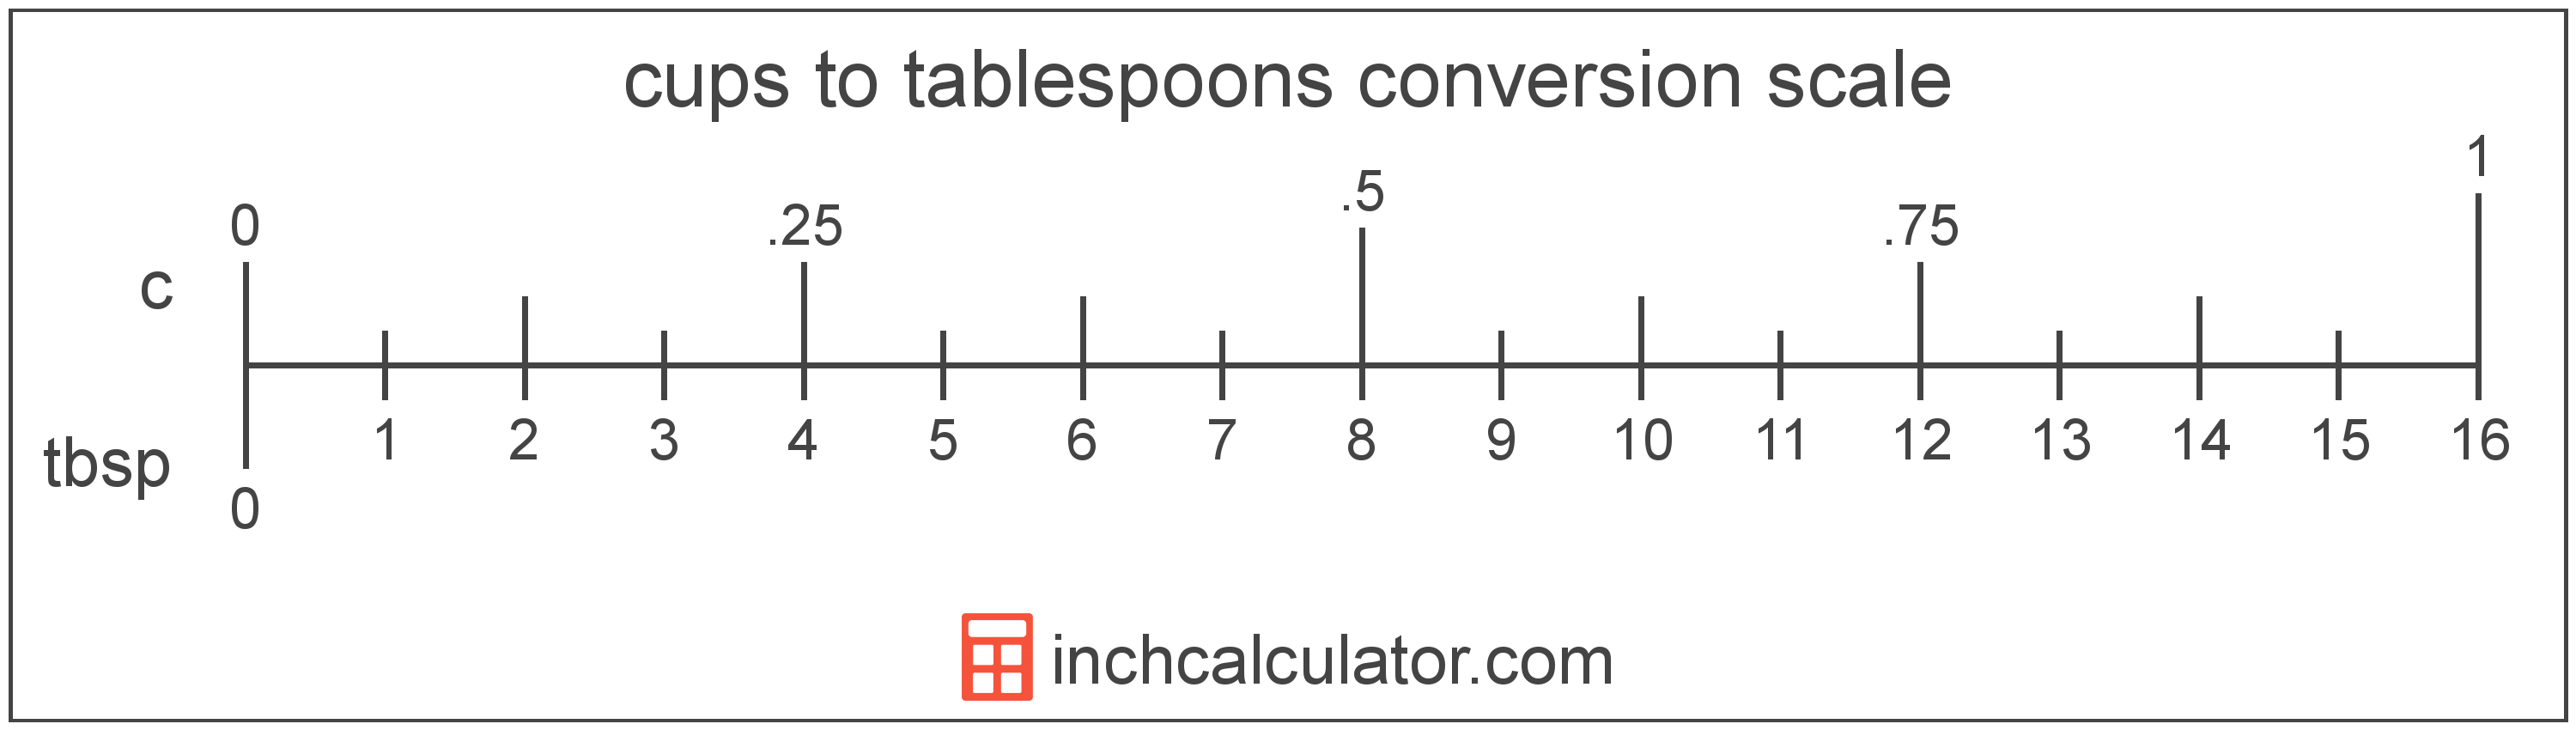 cups-to-tablespoons-conversion-c-to-tbsp-inch-calculator